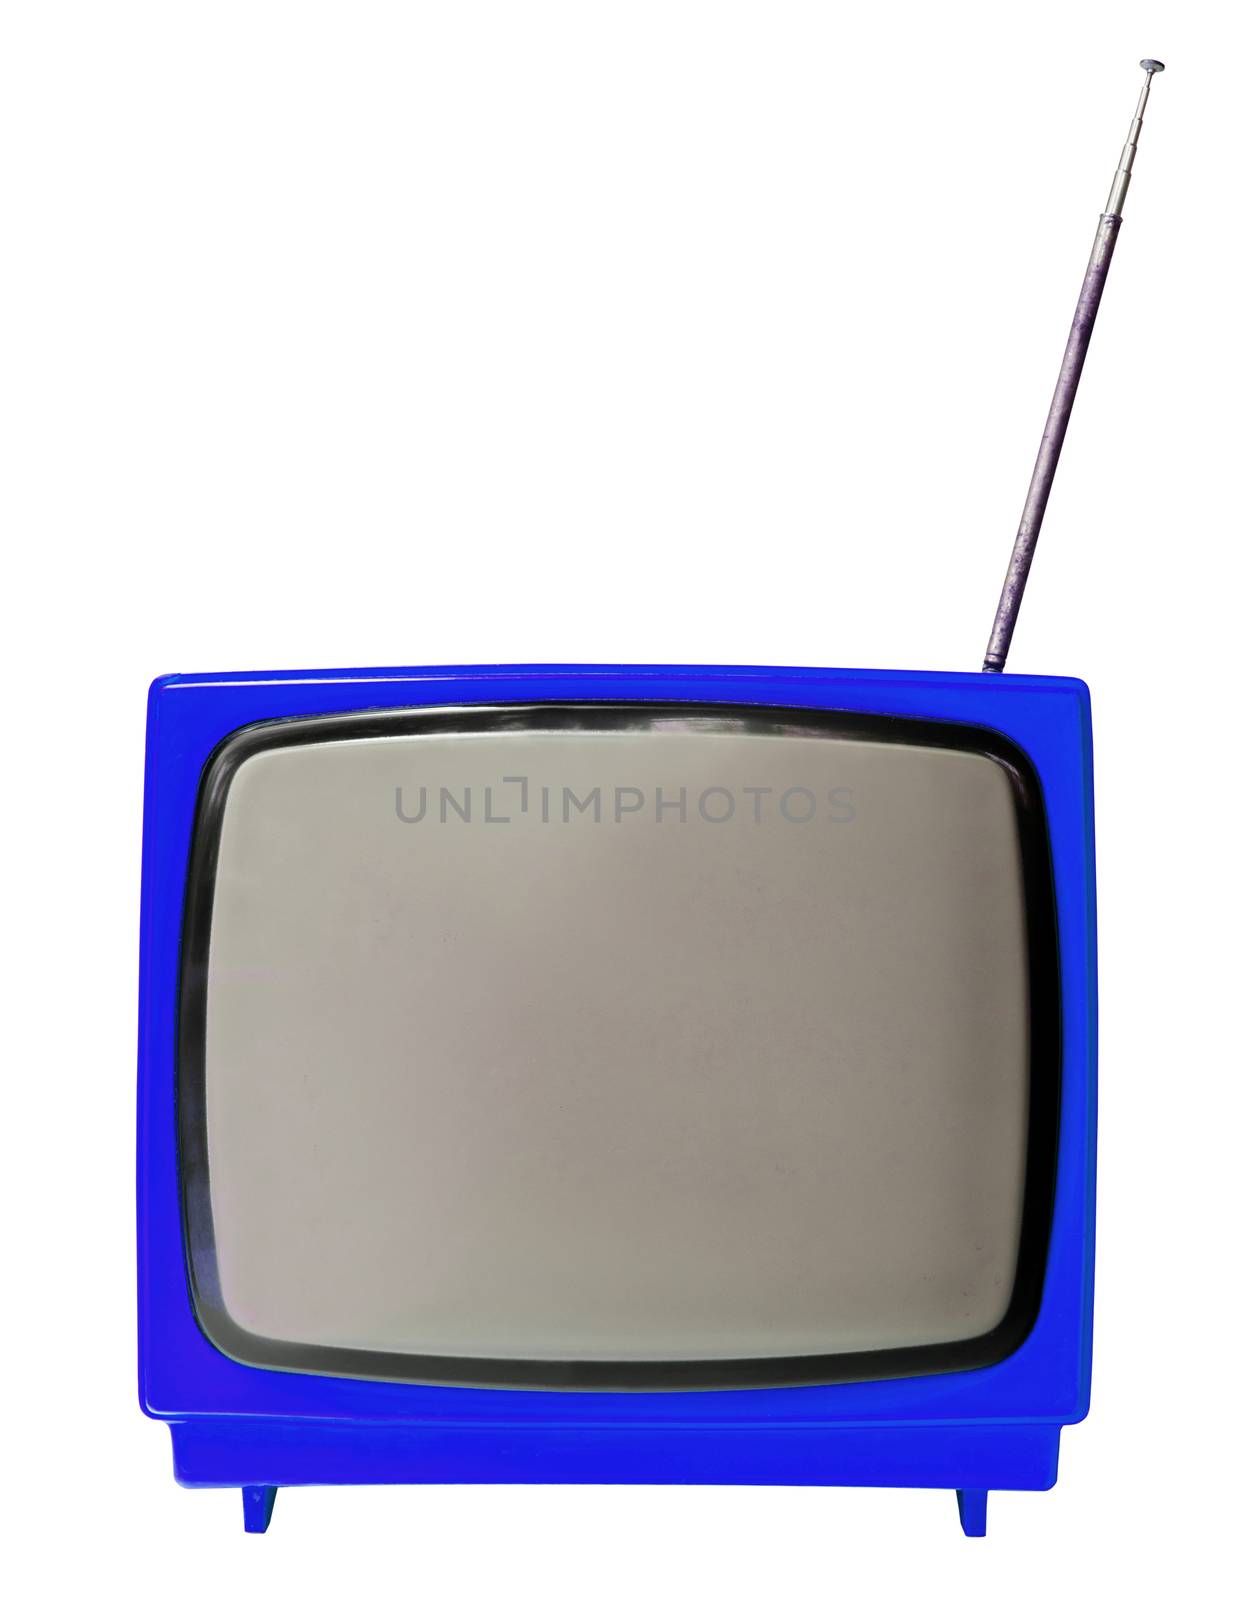 Blue light vintage analog television isolated over white background, clipping path.